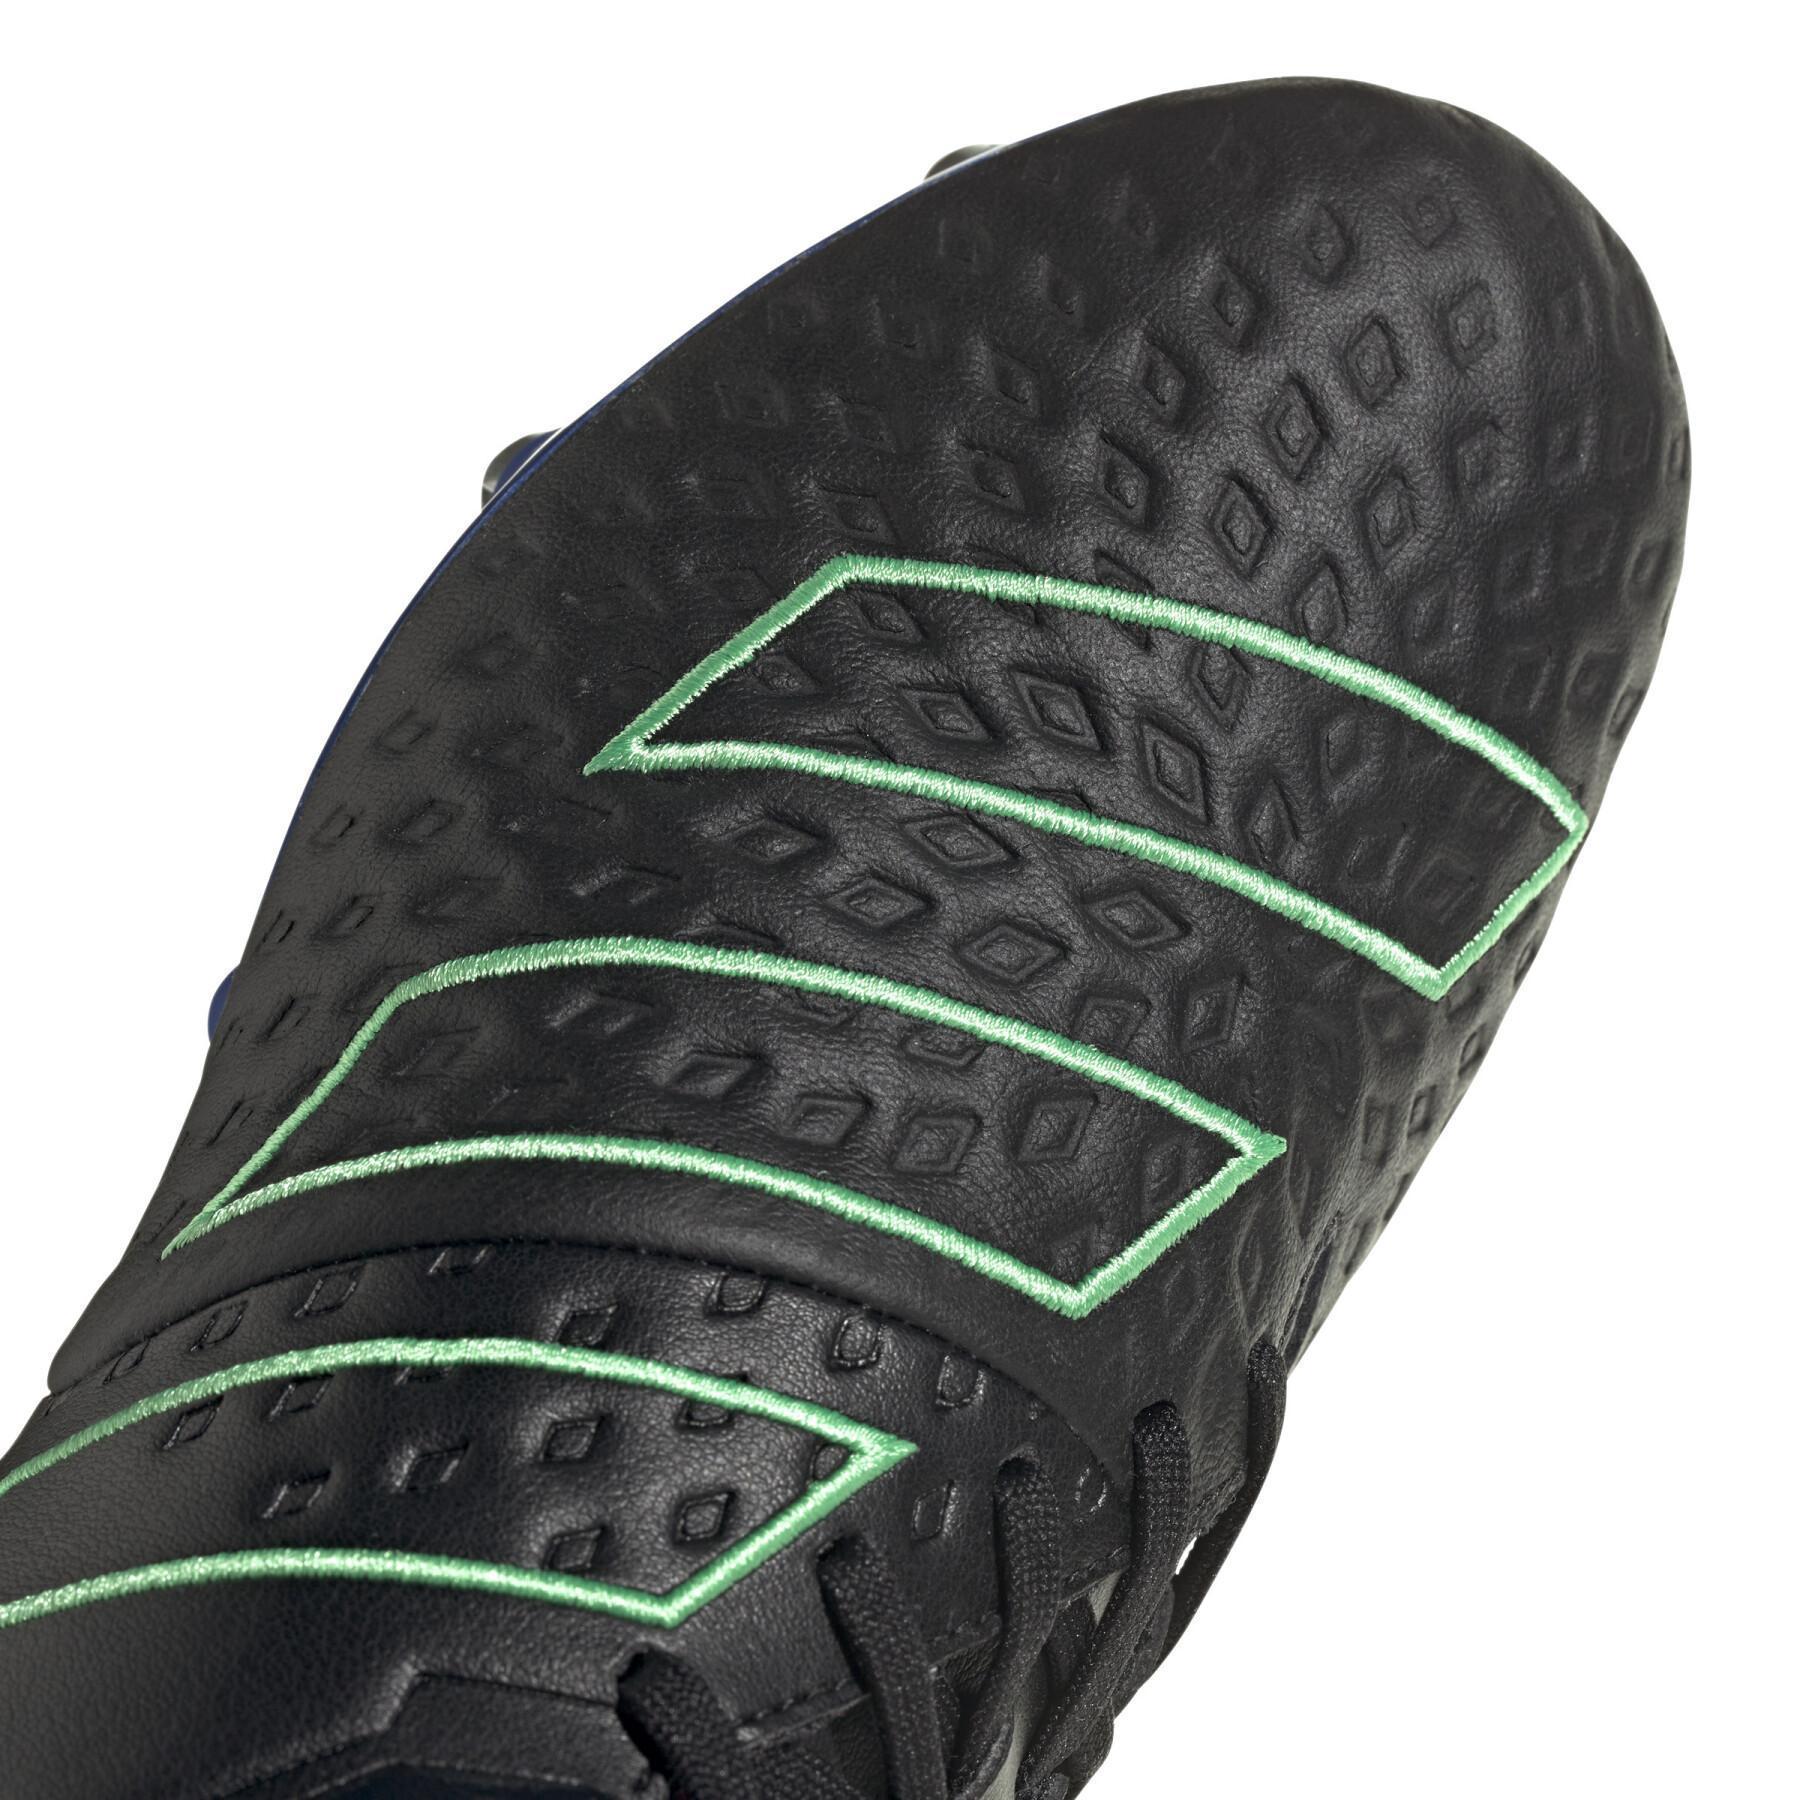 Rugby shoes adidas Malice Elite SG